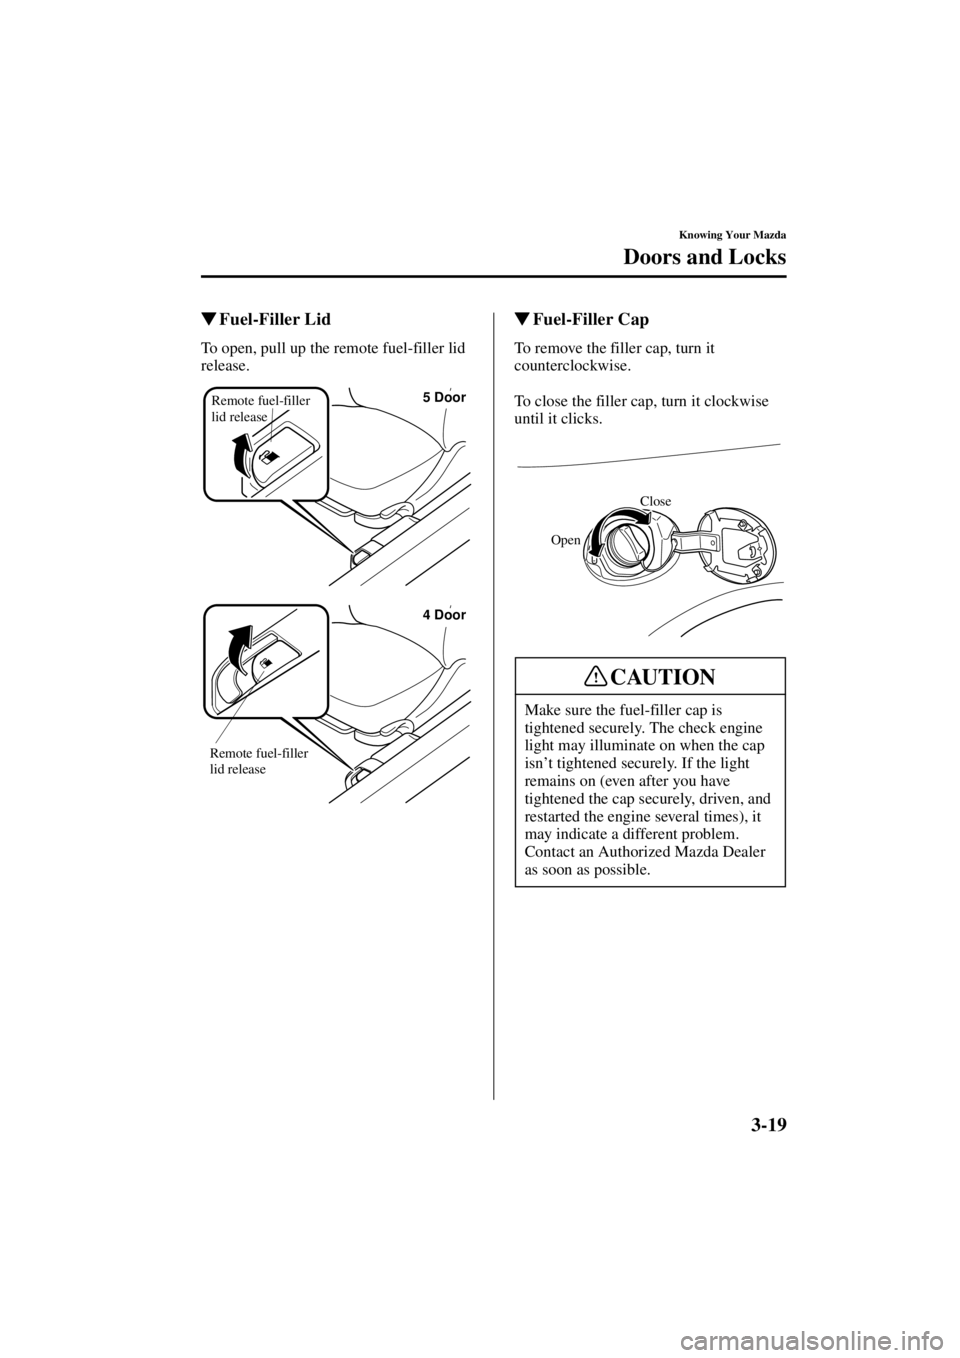 MAZDA MODEL 3 5-DOOR 2004 Owners Guide 3-19
Knowing Your Mazda
Doors and Locks
Form No. 8S18-EA-03I
Fuel-Filler Lid
To open, pull up the remote fuel-filler lid 
release.
 Fuel-Filler Cap
To remove the filler cap, turn it 
counterclockwis